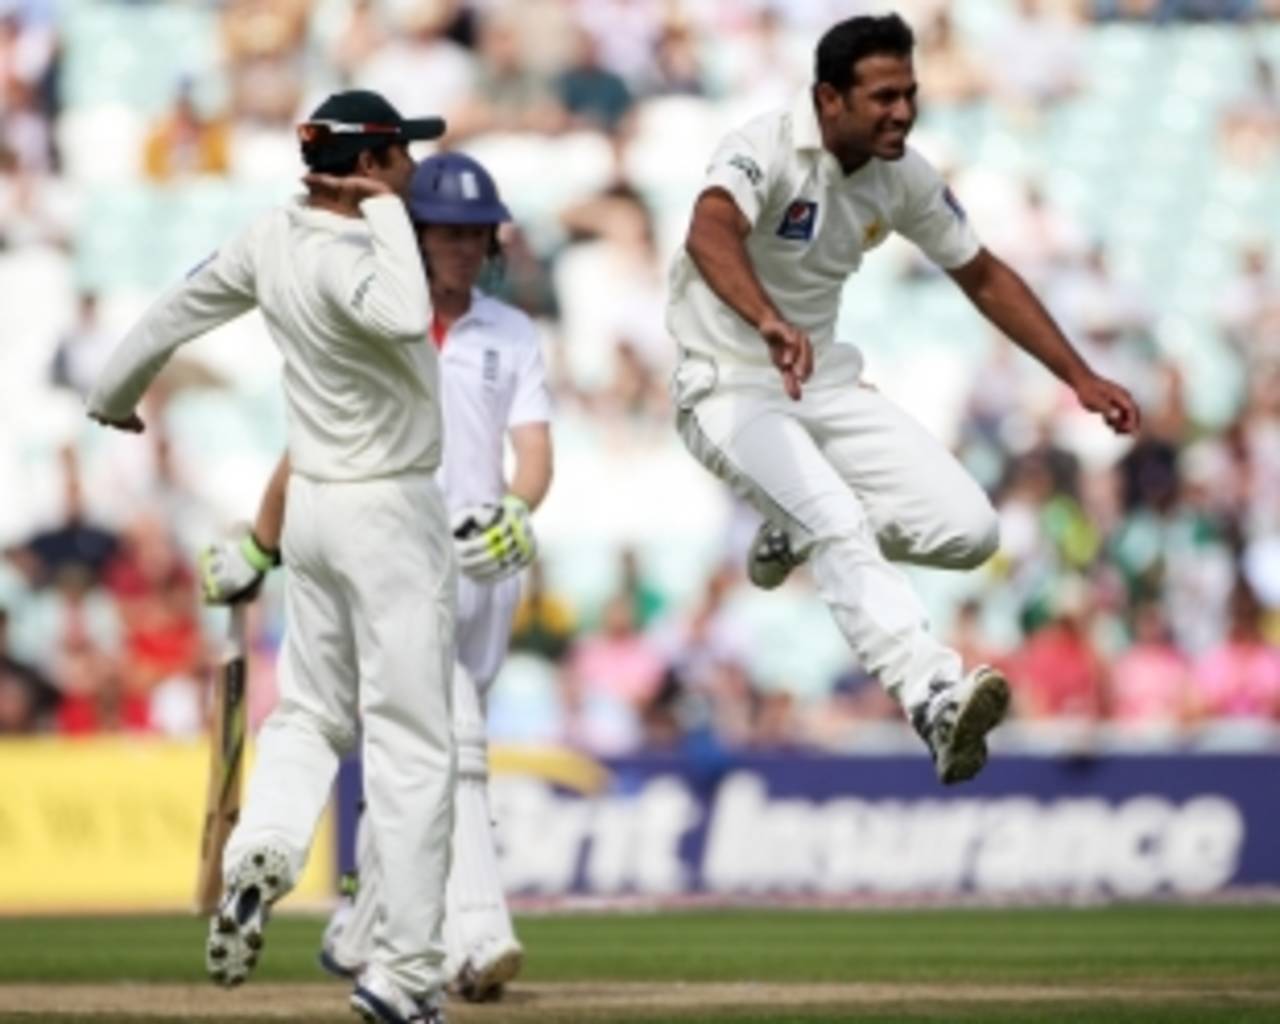 Wahab Riaz celebrates dismissing Eoin Morgan for his fourth wicket on debut, England v Pakistan, 3rd Test, The Oval, August 18, 2010